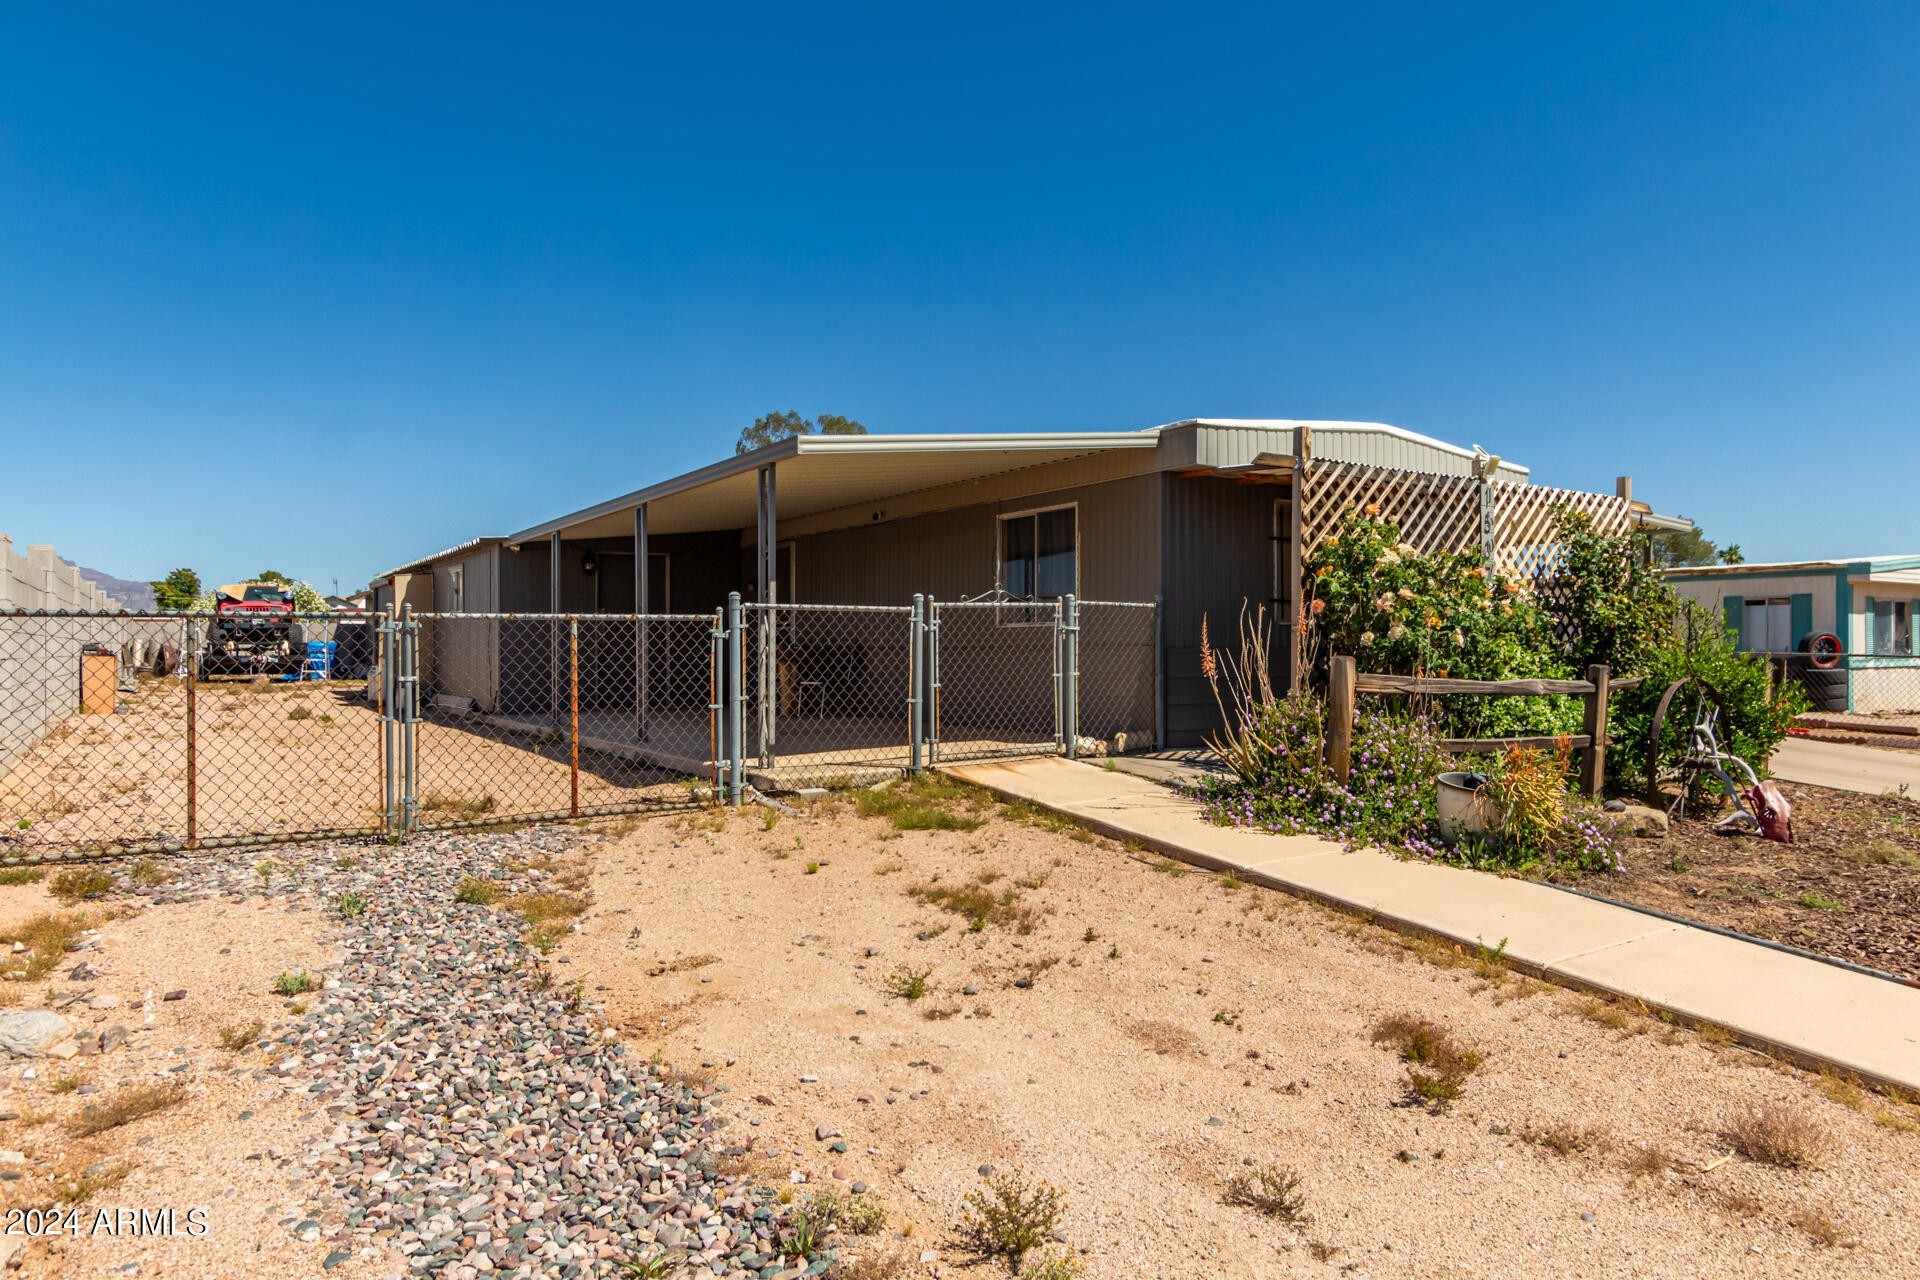 31. 1507 S Desert View Place